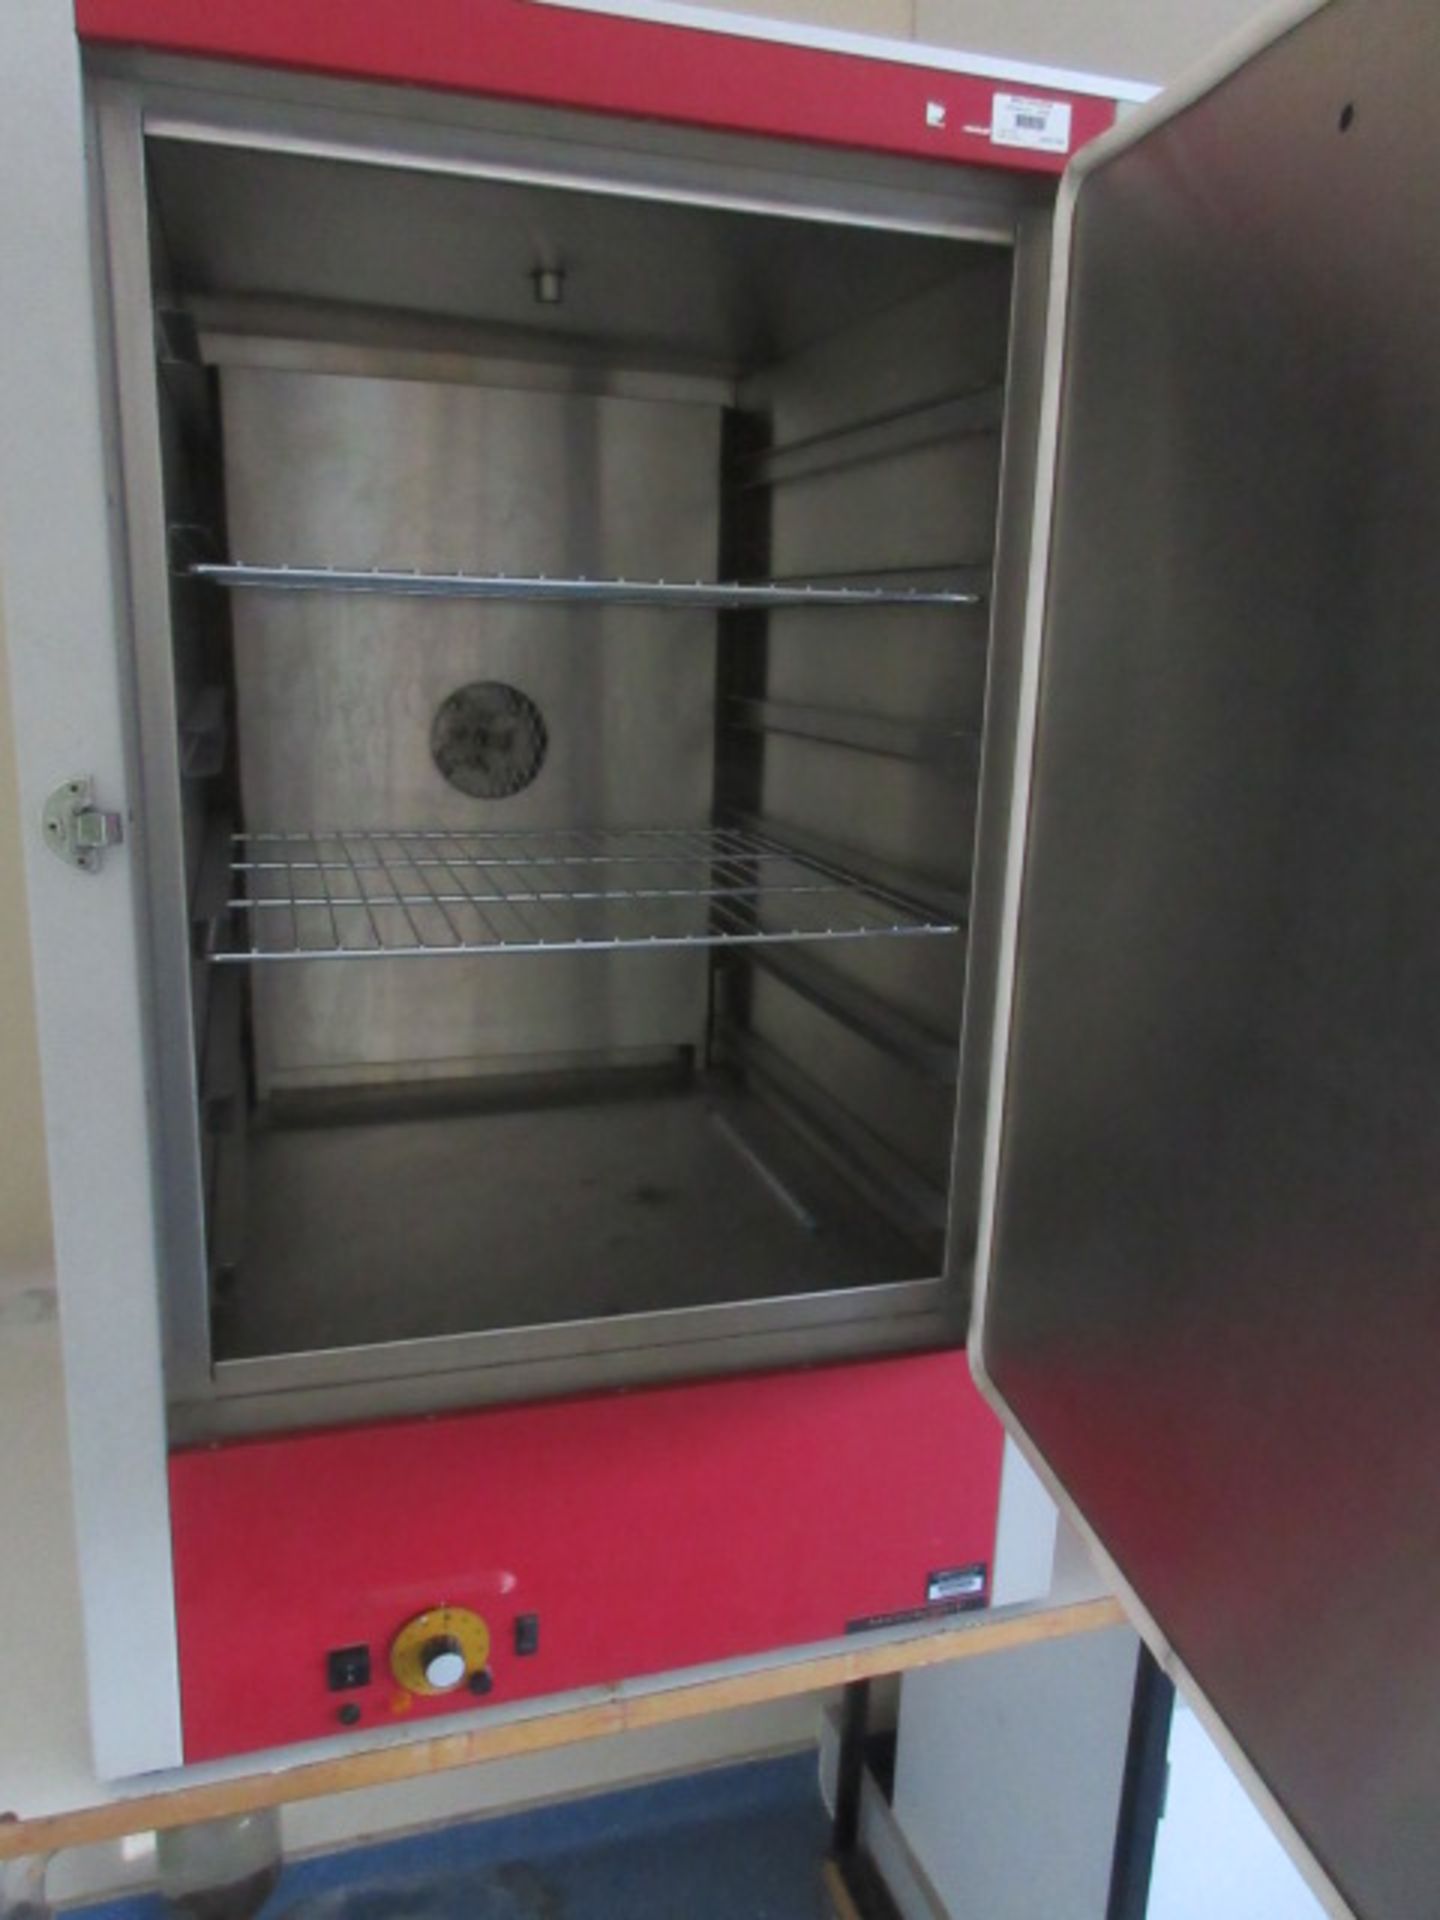 GENLAB E6S ELECTRIC OVEN 500mm WIDE x 500mm DEEP x 700mm HIGH ,240V. SN92DO77 - Image 2 of 3